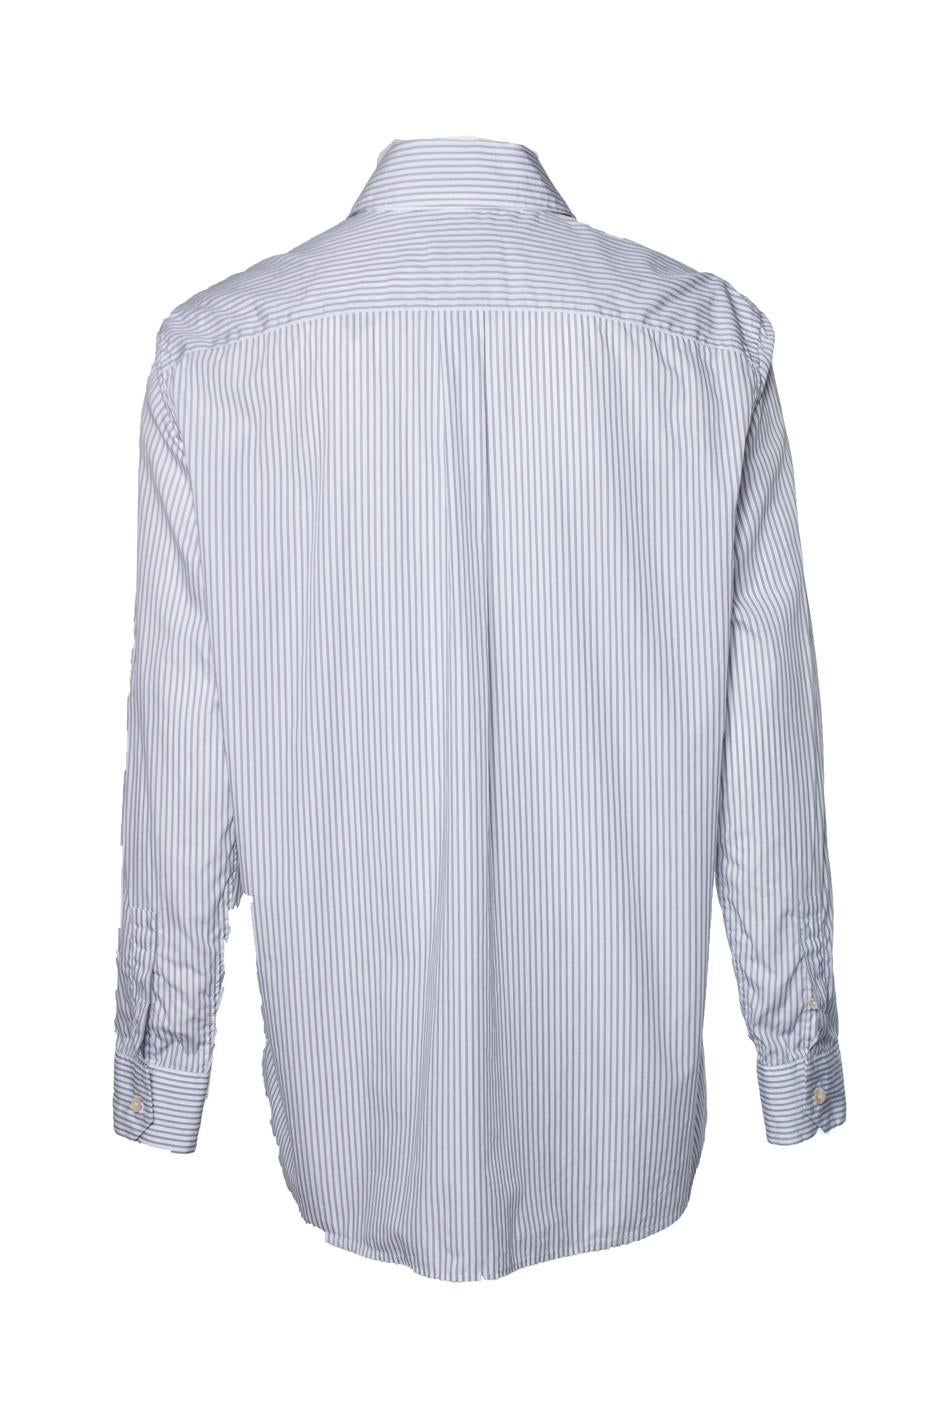 Saint Laurent, Pinstripe shirt In Excellent Condition For Sale In AMSTERDAM, NL